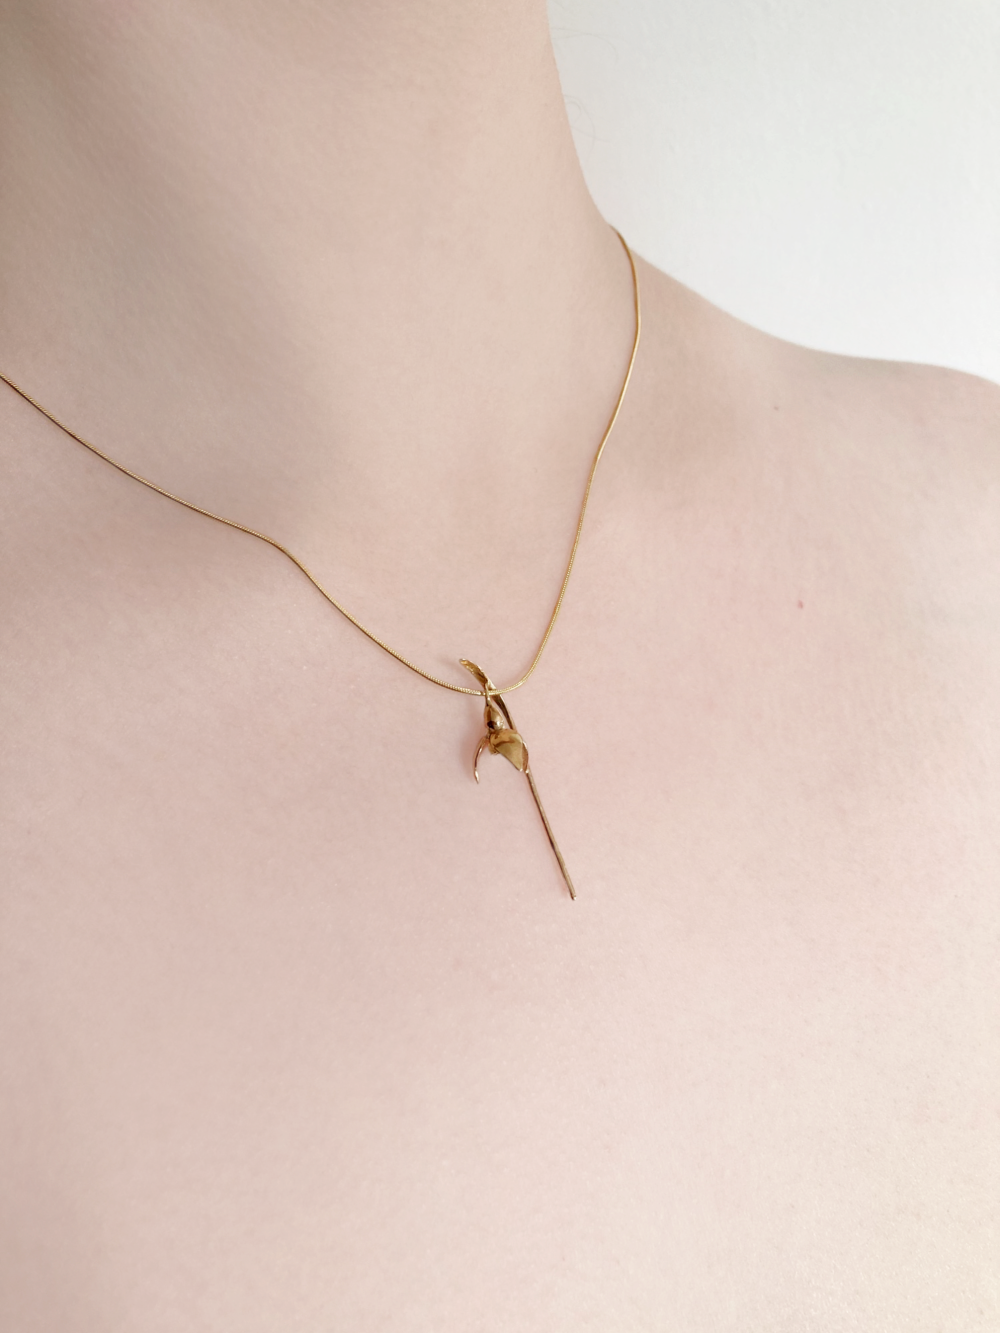 woman's neck wearing gold chain with lifelike gold single snowdrop pendant